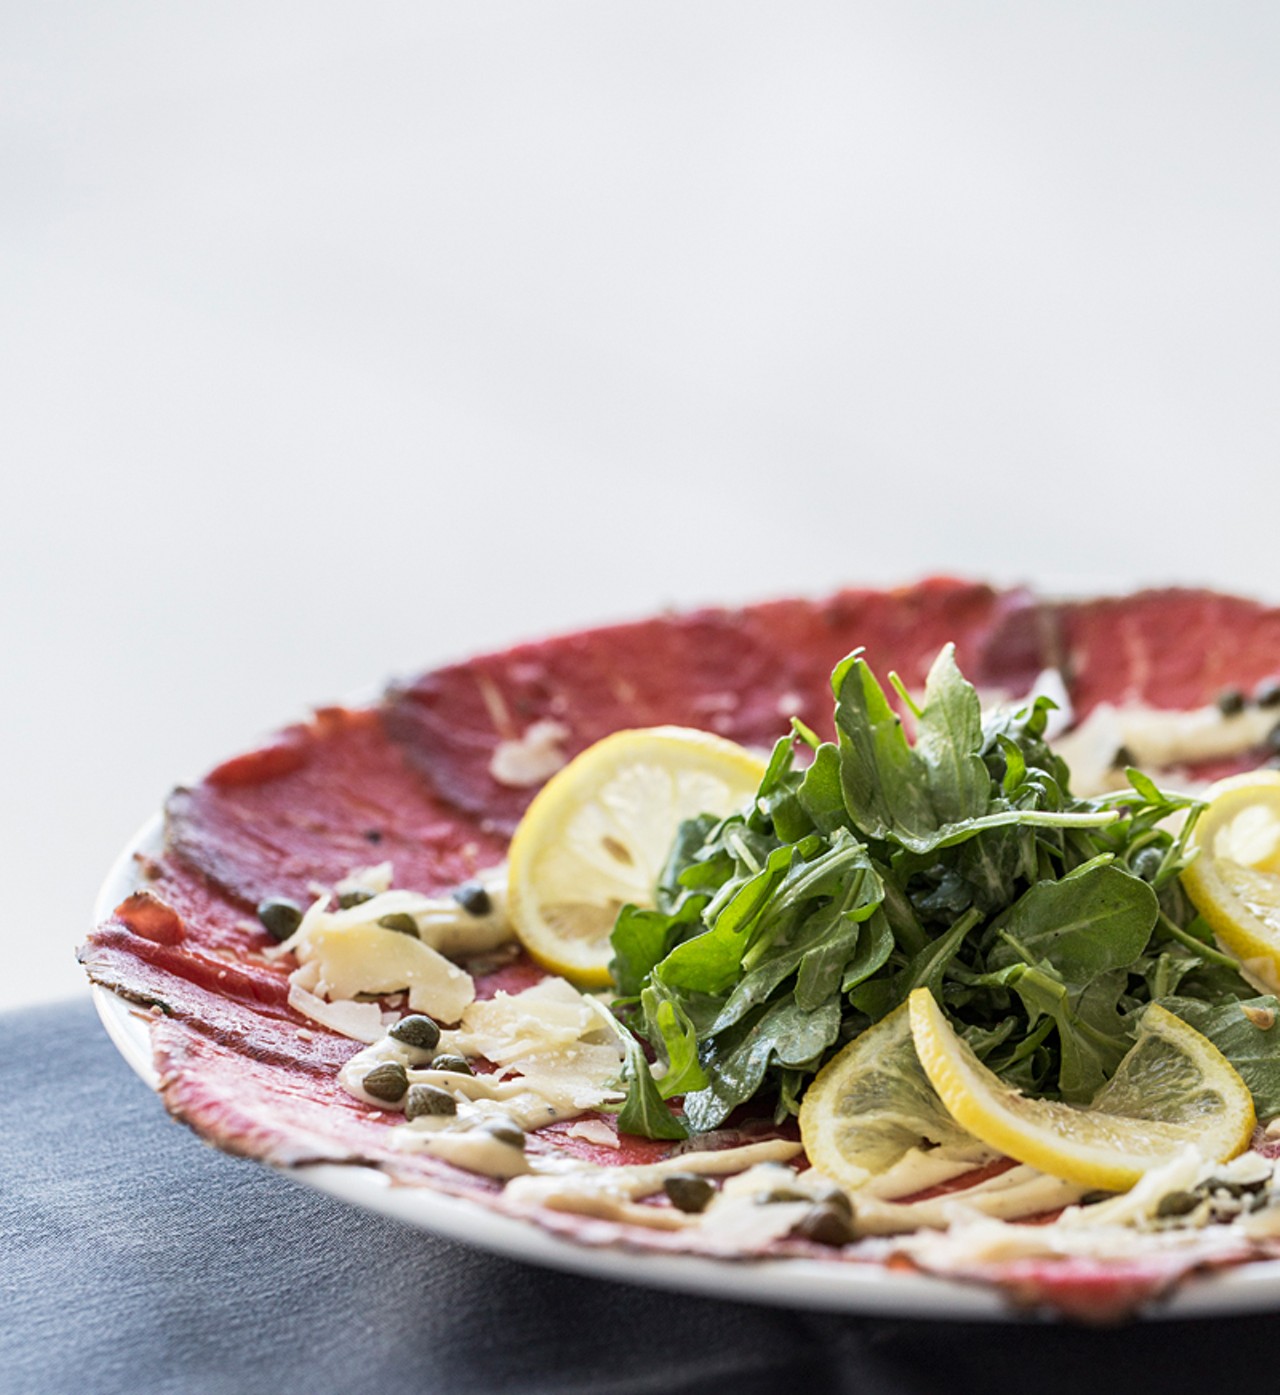 Peppered beef carpaccio: thinly sliced beef fillet, mustard dressing, arugula, shaved parmesan, capers and lemon.